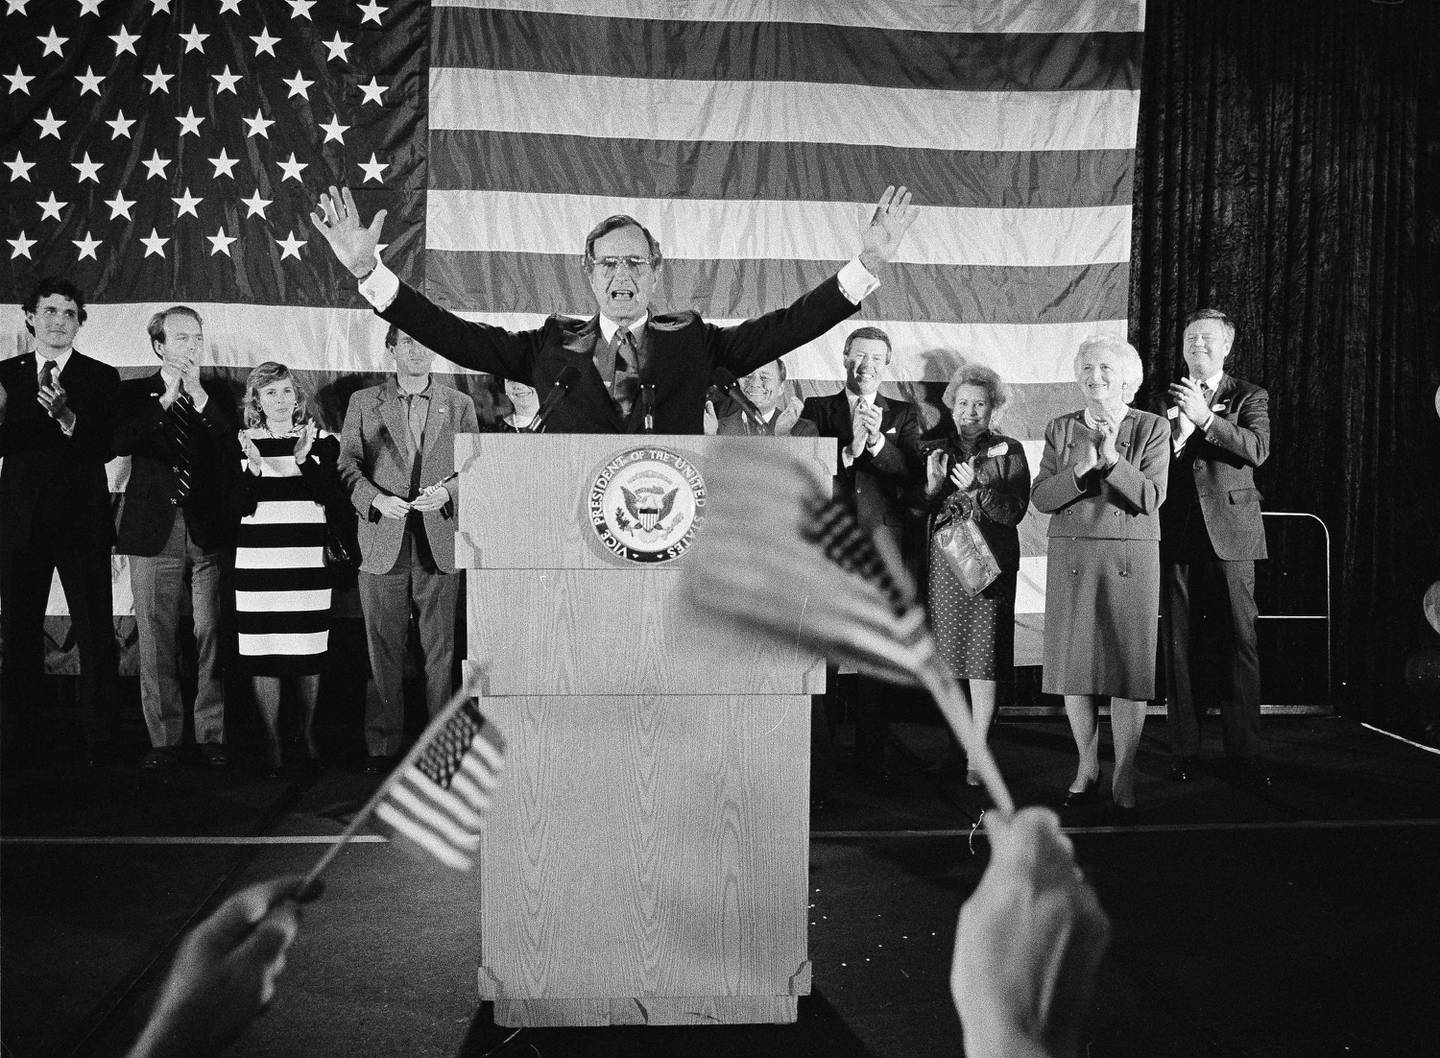 FILE - In this Nov. 7, 1984 file photo, flag-wavers greet Vice President George Bush after he was re-elected to the post of vice president, in Houston, Texas. The vice president's wife Barbara Bush is seen second from right. Others are unidentified. Bush has died at age 94. Family spokesman Jim McGrath says Bush died shortly after 10 p.m. Friday, Nov. 30, 2018, about eight months after the death of his wife, Barbara Bush. (AP Photo/F. Carter Smith, File)